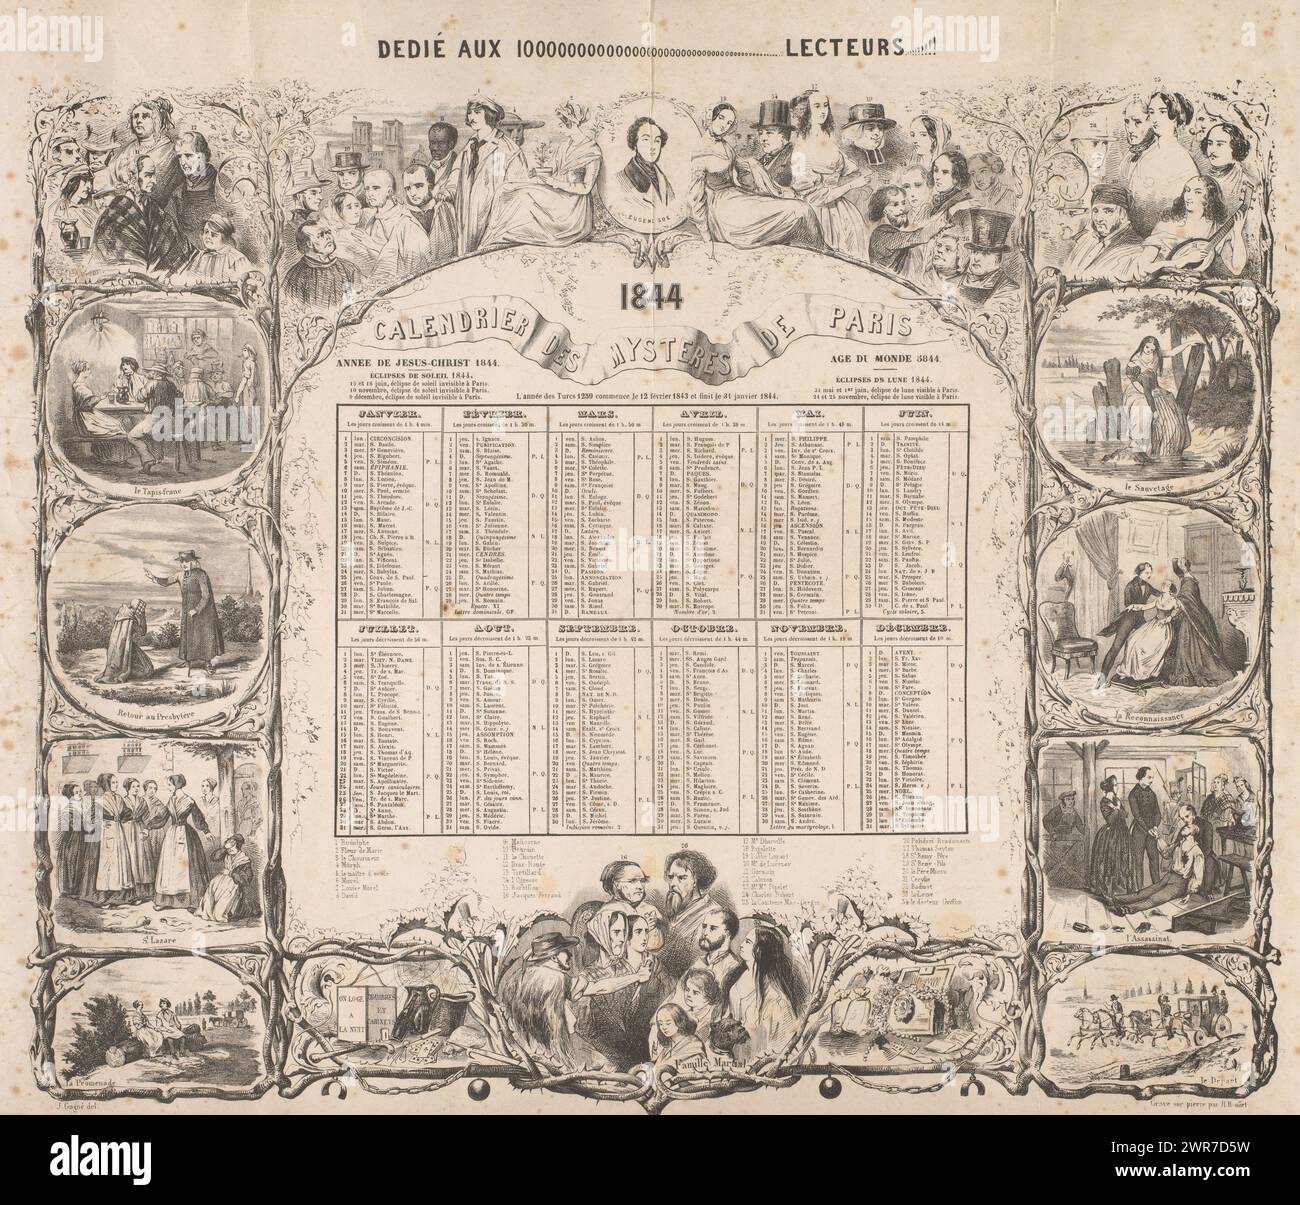 Calendar for the year 1844, Calendrier des mystères de Paris 1844 (title on object), Left and right of the calendar eight small representations of figures in various circumstances. Above and below the calendar 33 portraits of (partly) historical figures. At the top is the inscription: 'Dedié aux 1000000000 lecteurs!!!!'., print maker: H. Boullet, after drawing by: Jacques Gagné, 1843, paper, height 418 mm × width 555 mm, print Stock Photo